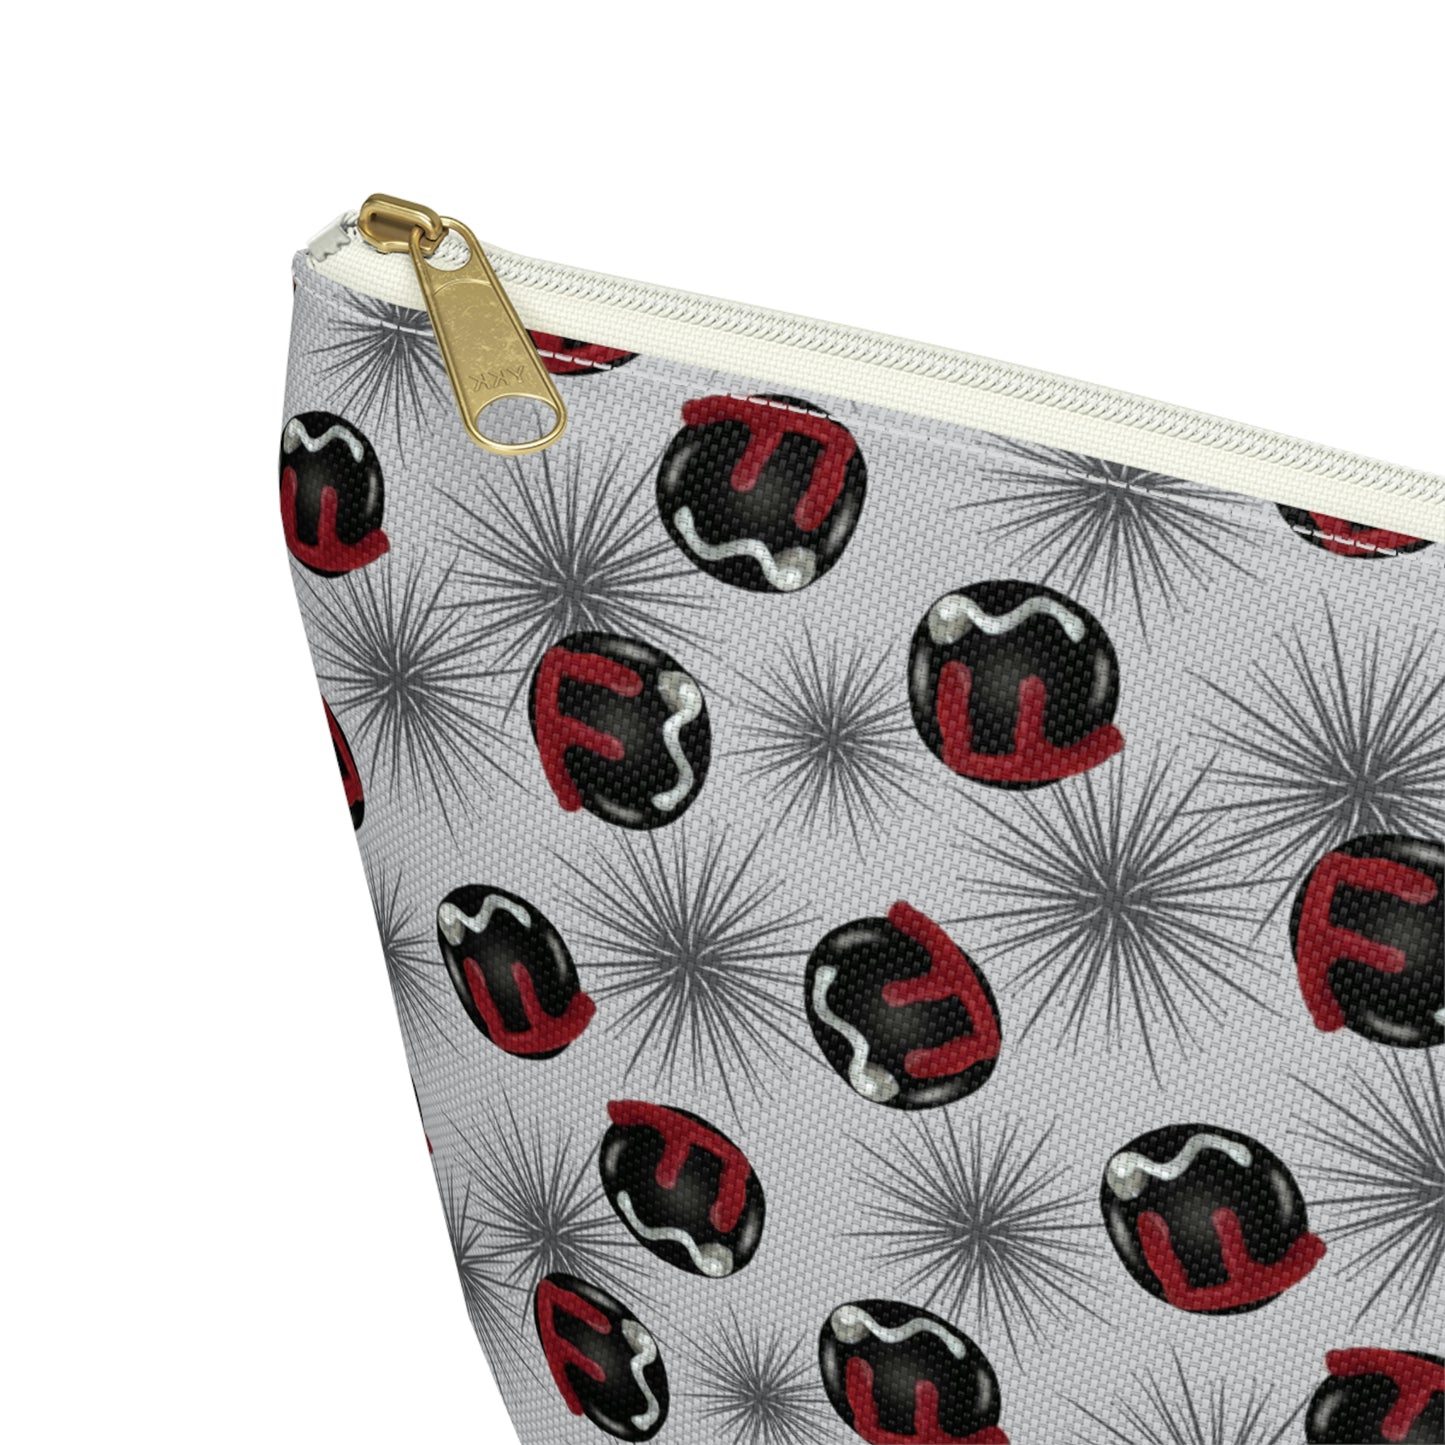 Accessory Pouch in F Bomb Pattern